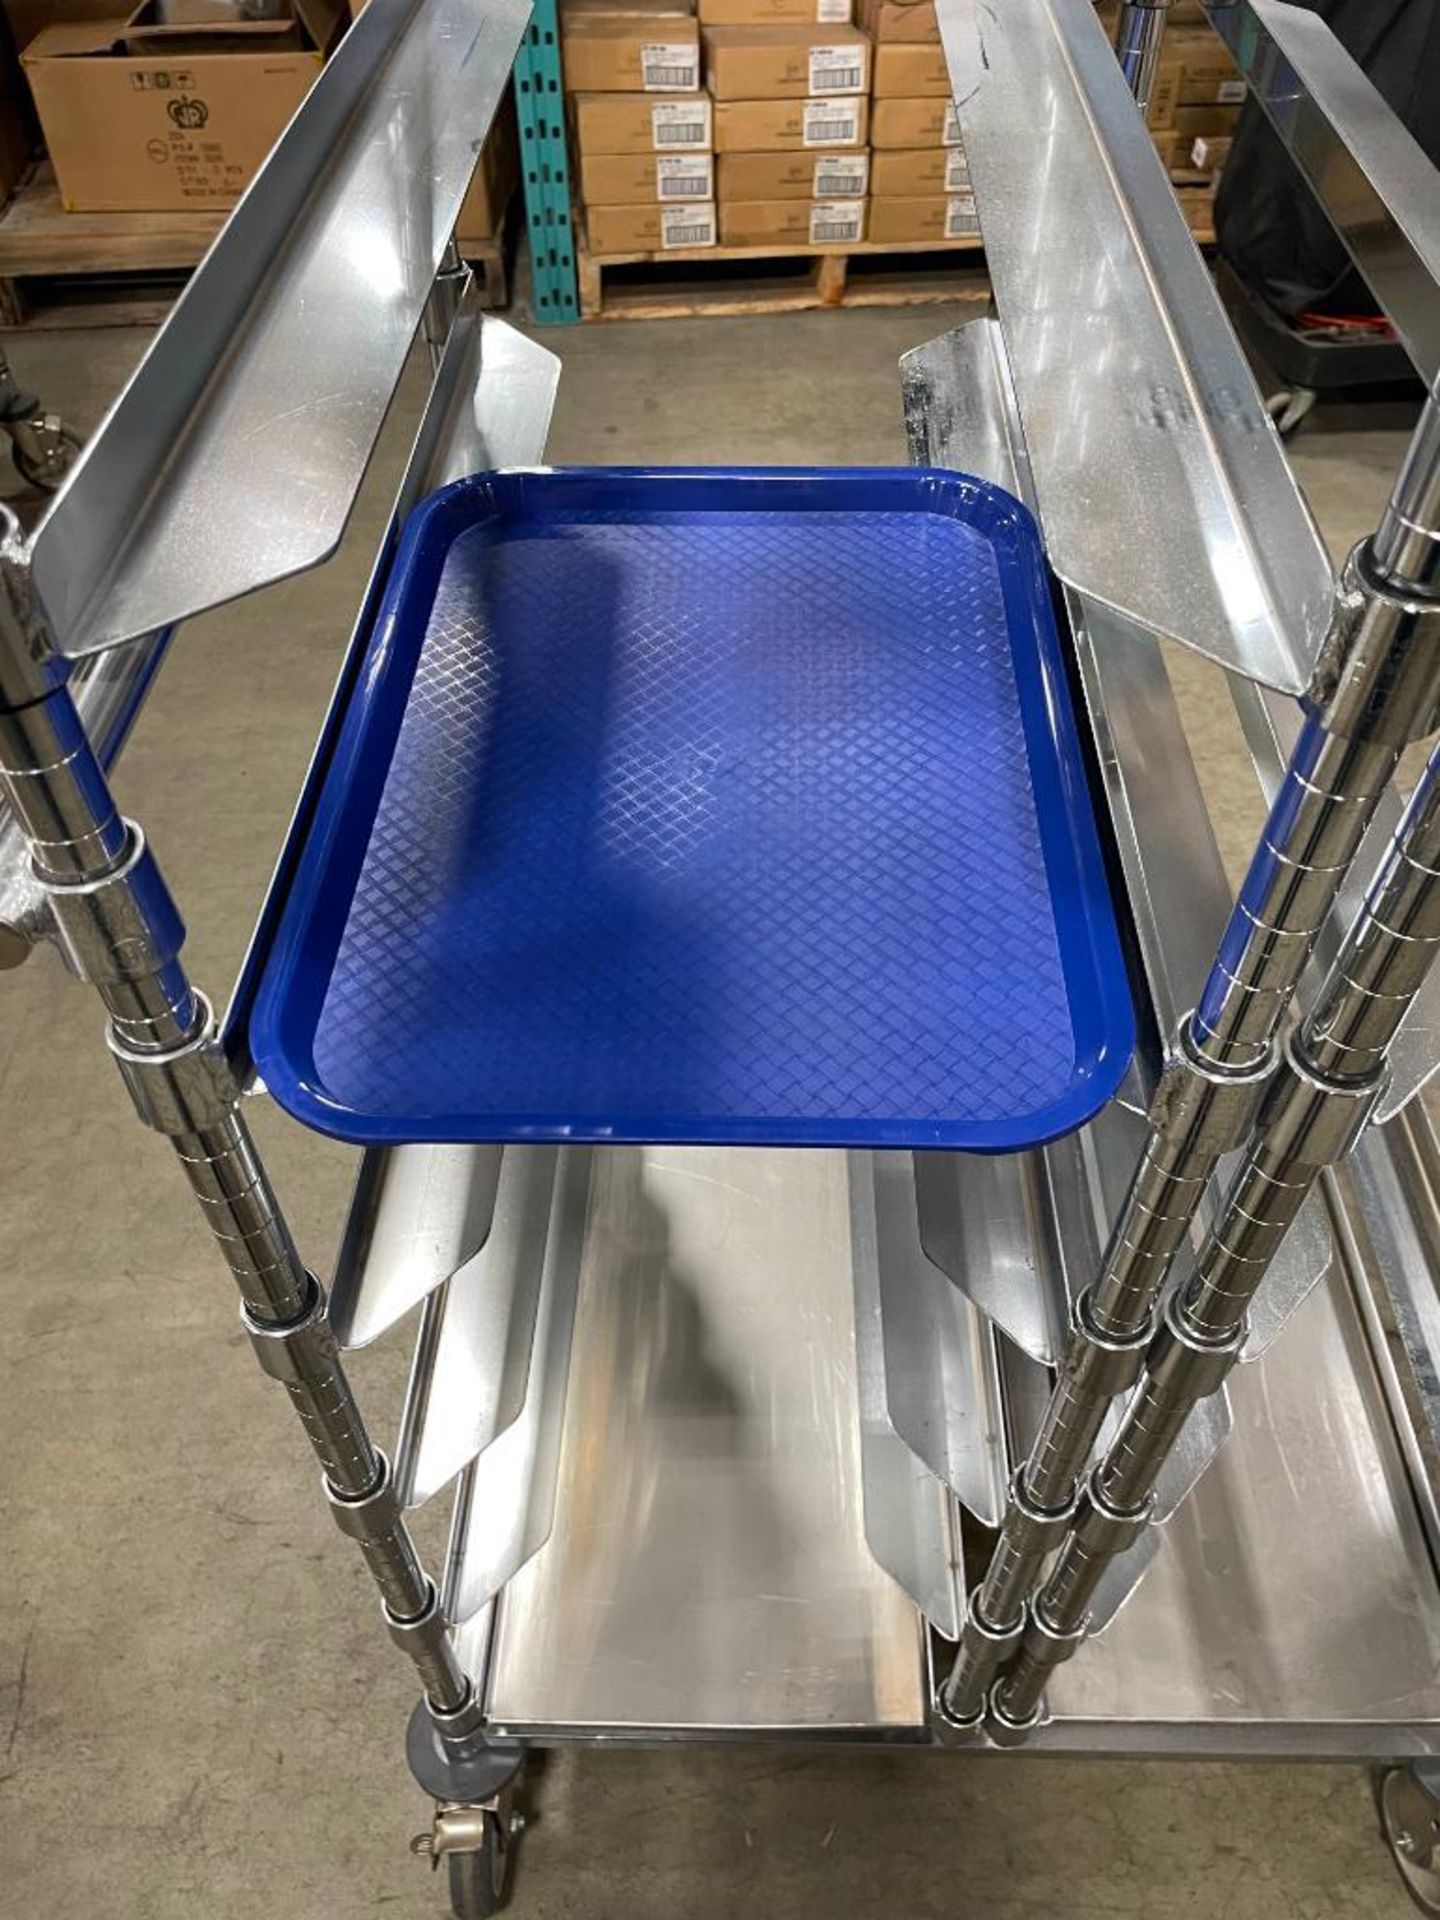 31" X 24" STAINLESS STEEL CART WITH 16-SLOT PAN HOLDER - Image 3 of 5